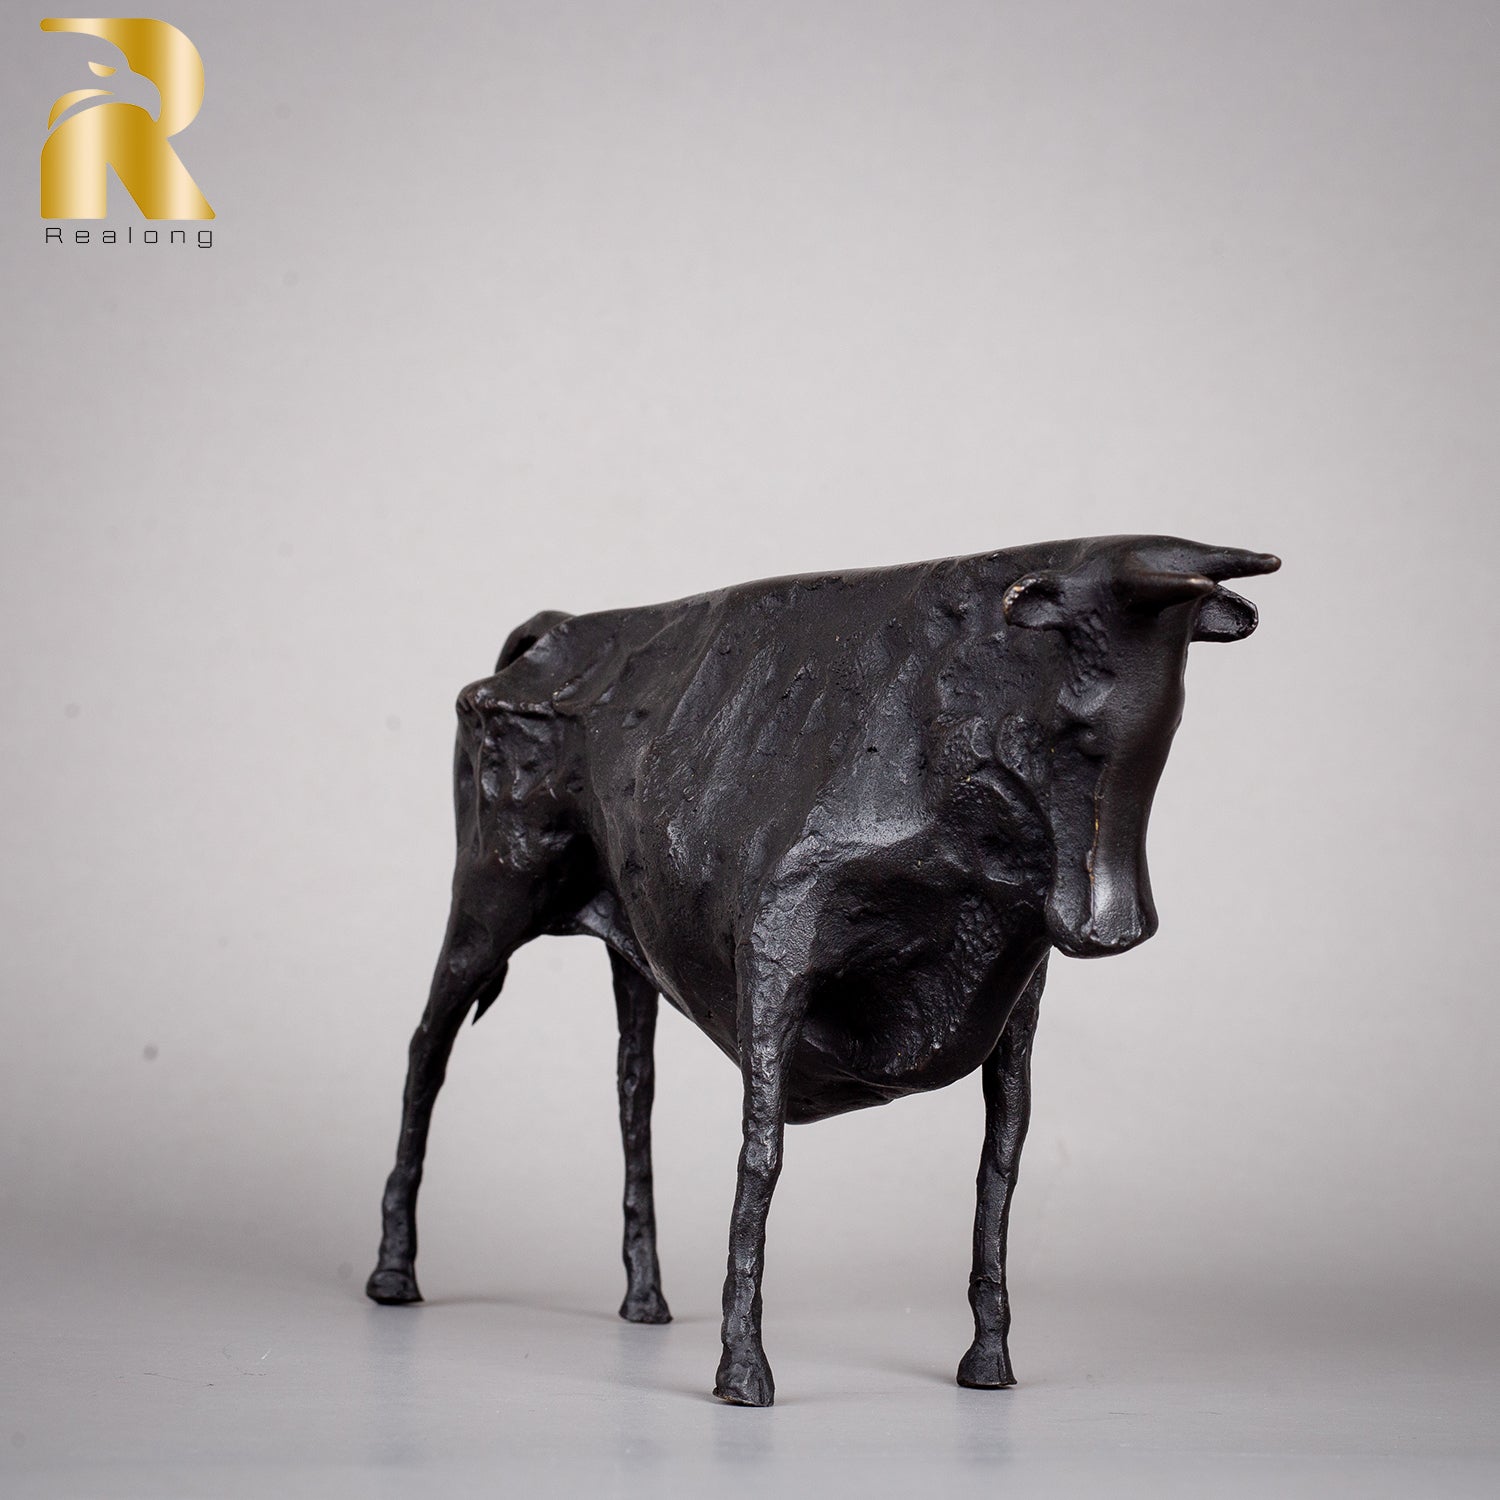 Abstract Bronze Bull Statue Bronze Replica Art Crafts by Picasso Famous Bronze Bull Sculpture For Home Decor Collection Gifts